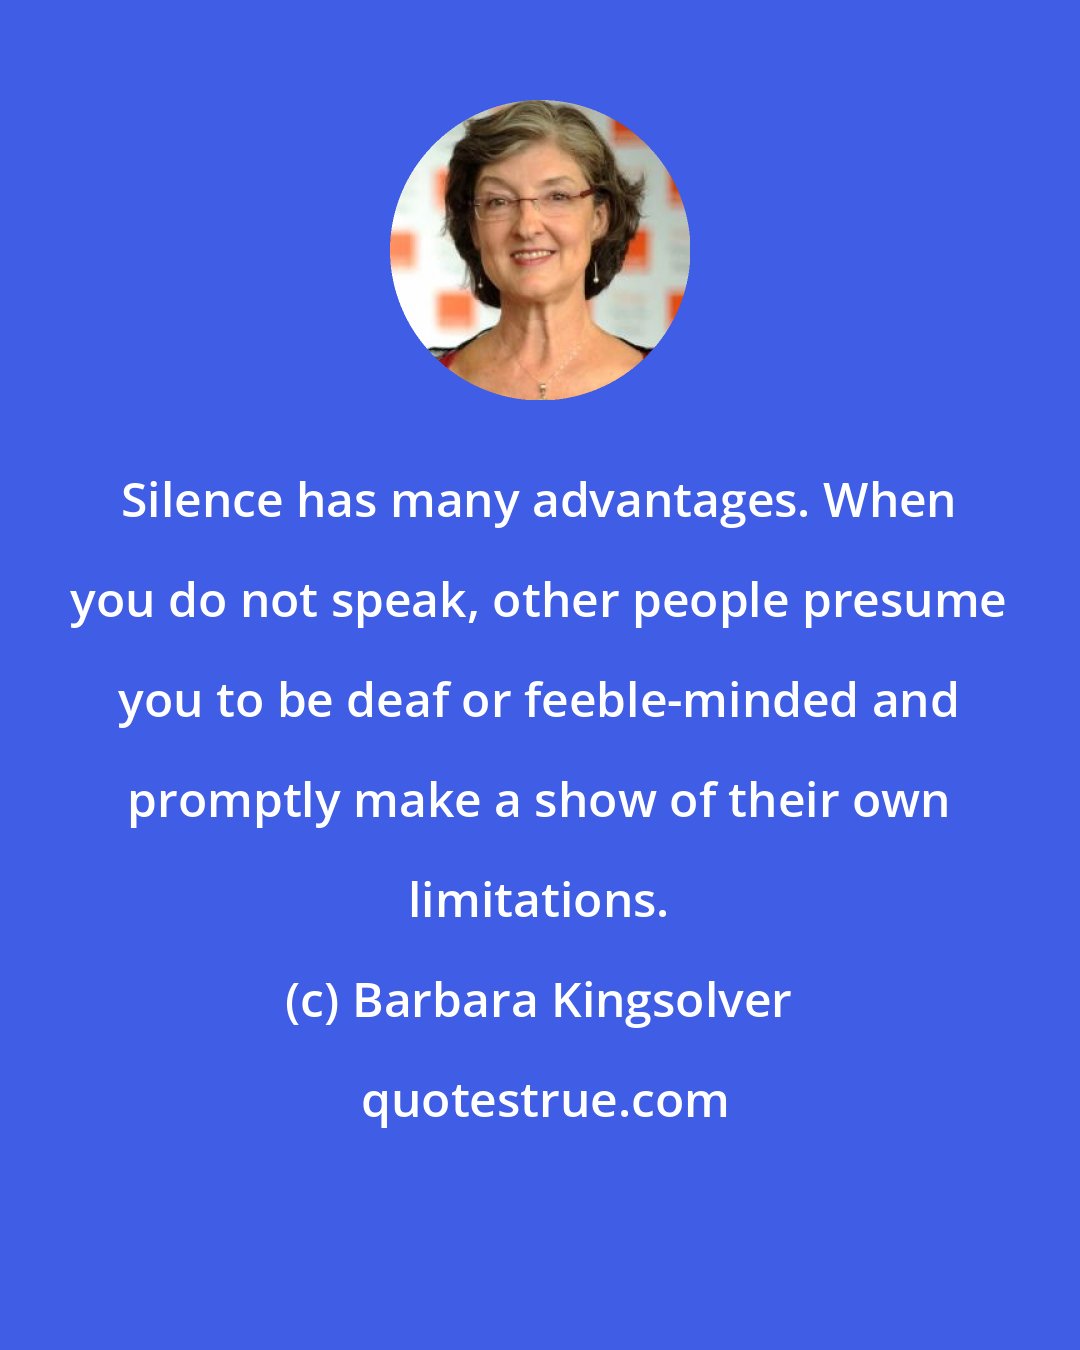 Barbara Kingsolver: Silence has many advantages. When you do not speak, other people presume you to be deaf or feeble-minded and promptly make a show of their own limitations.